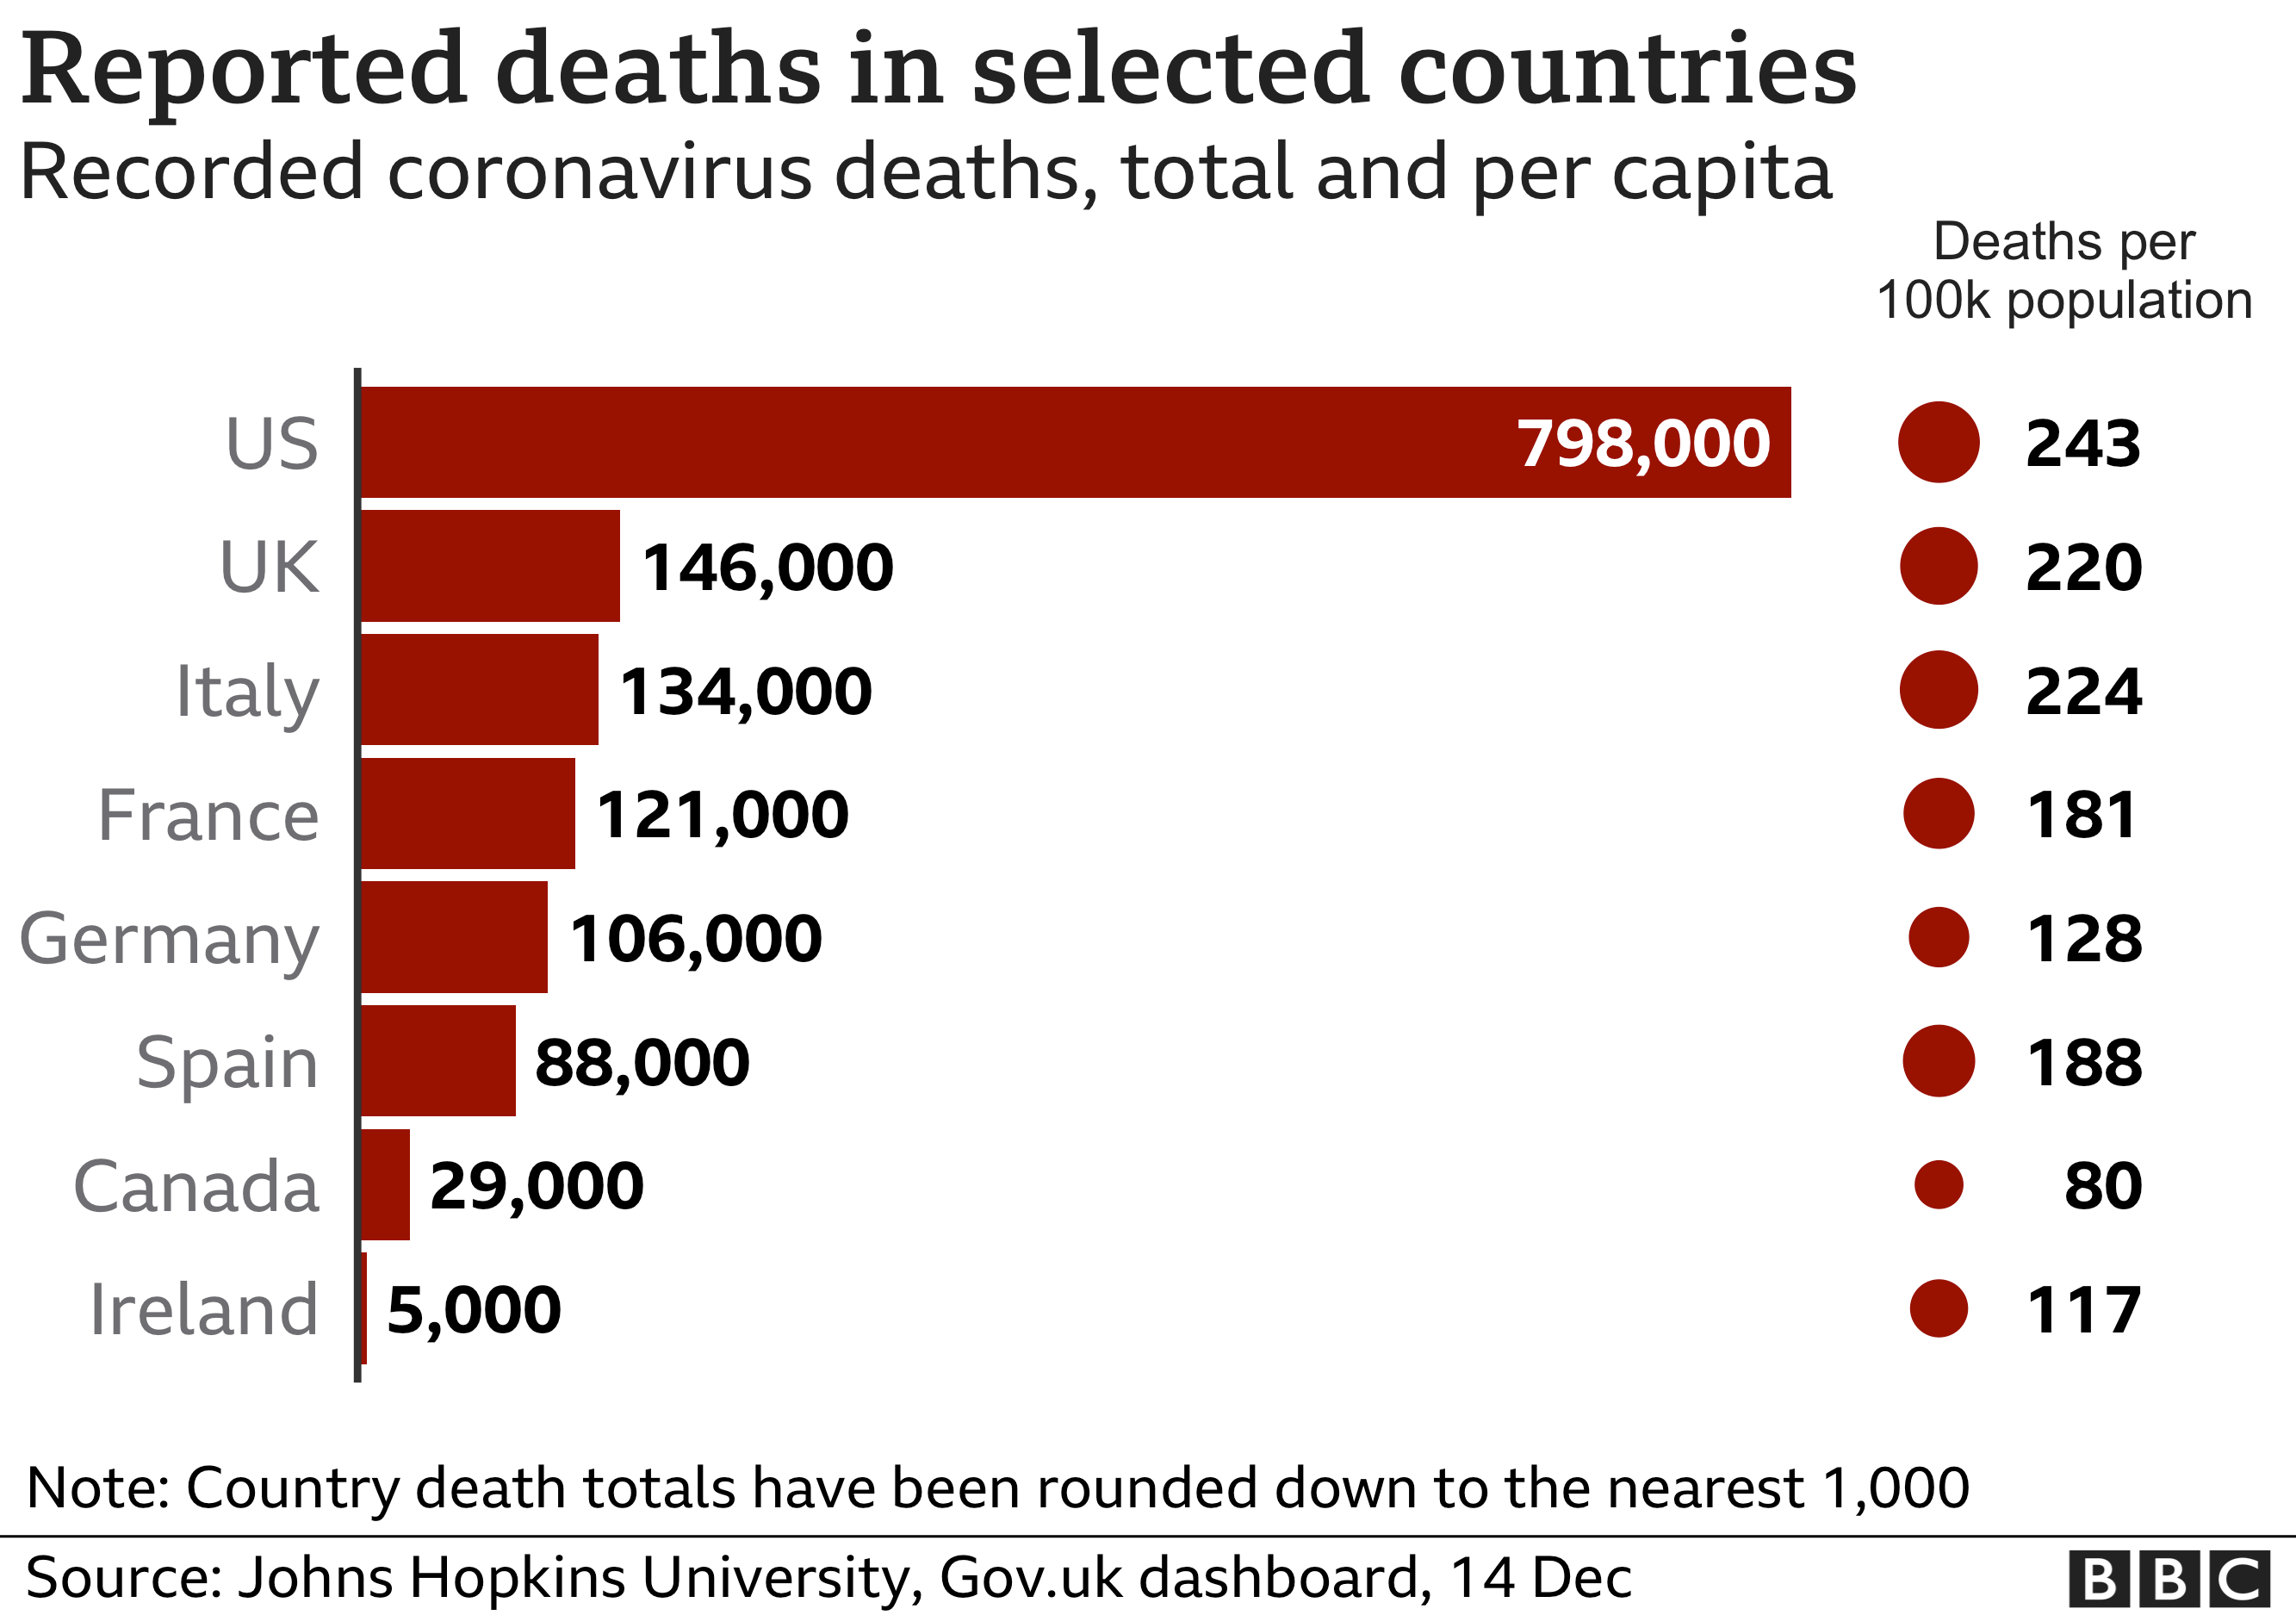 Recorded Covid-19 deaths in selected countries, by total and per capita